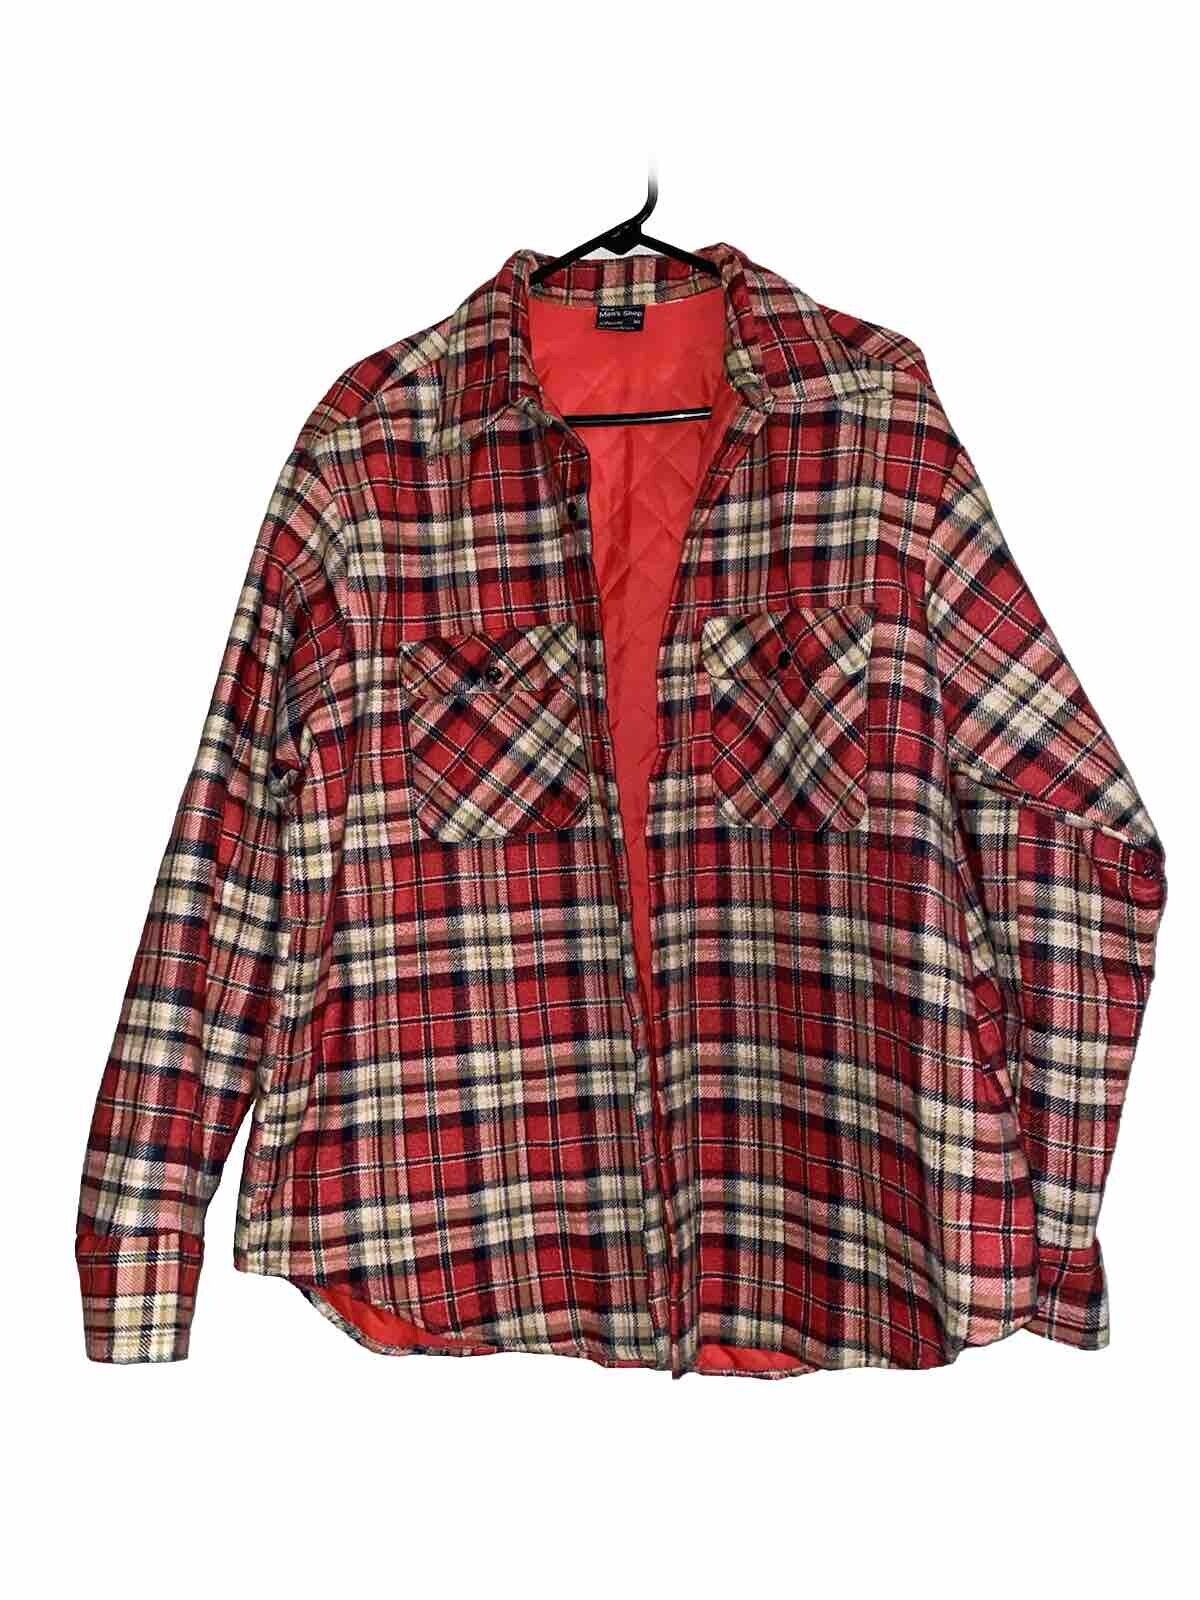 Vintage JC Penny Lightweight Flannel Shirt Mens XL Red Quilt Lined Long Sleeve